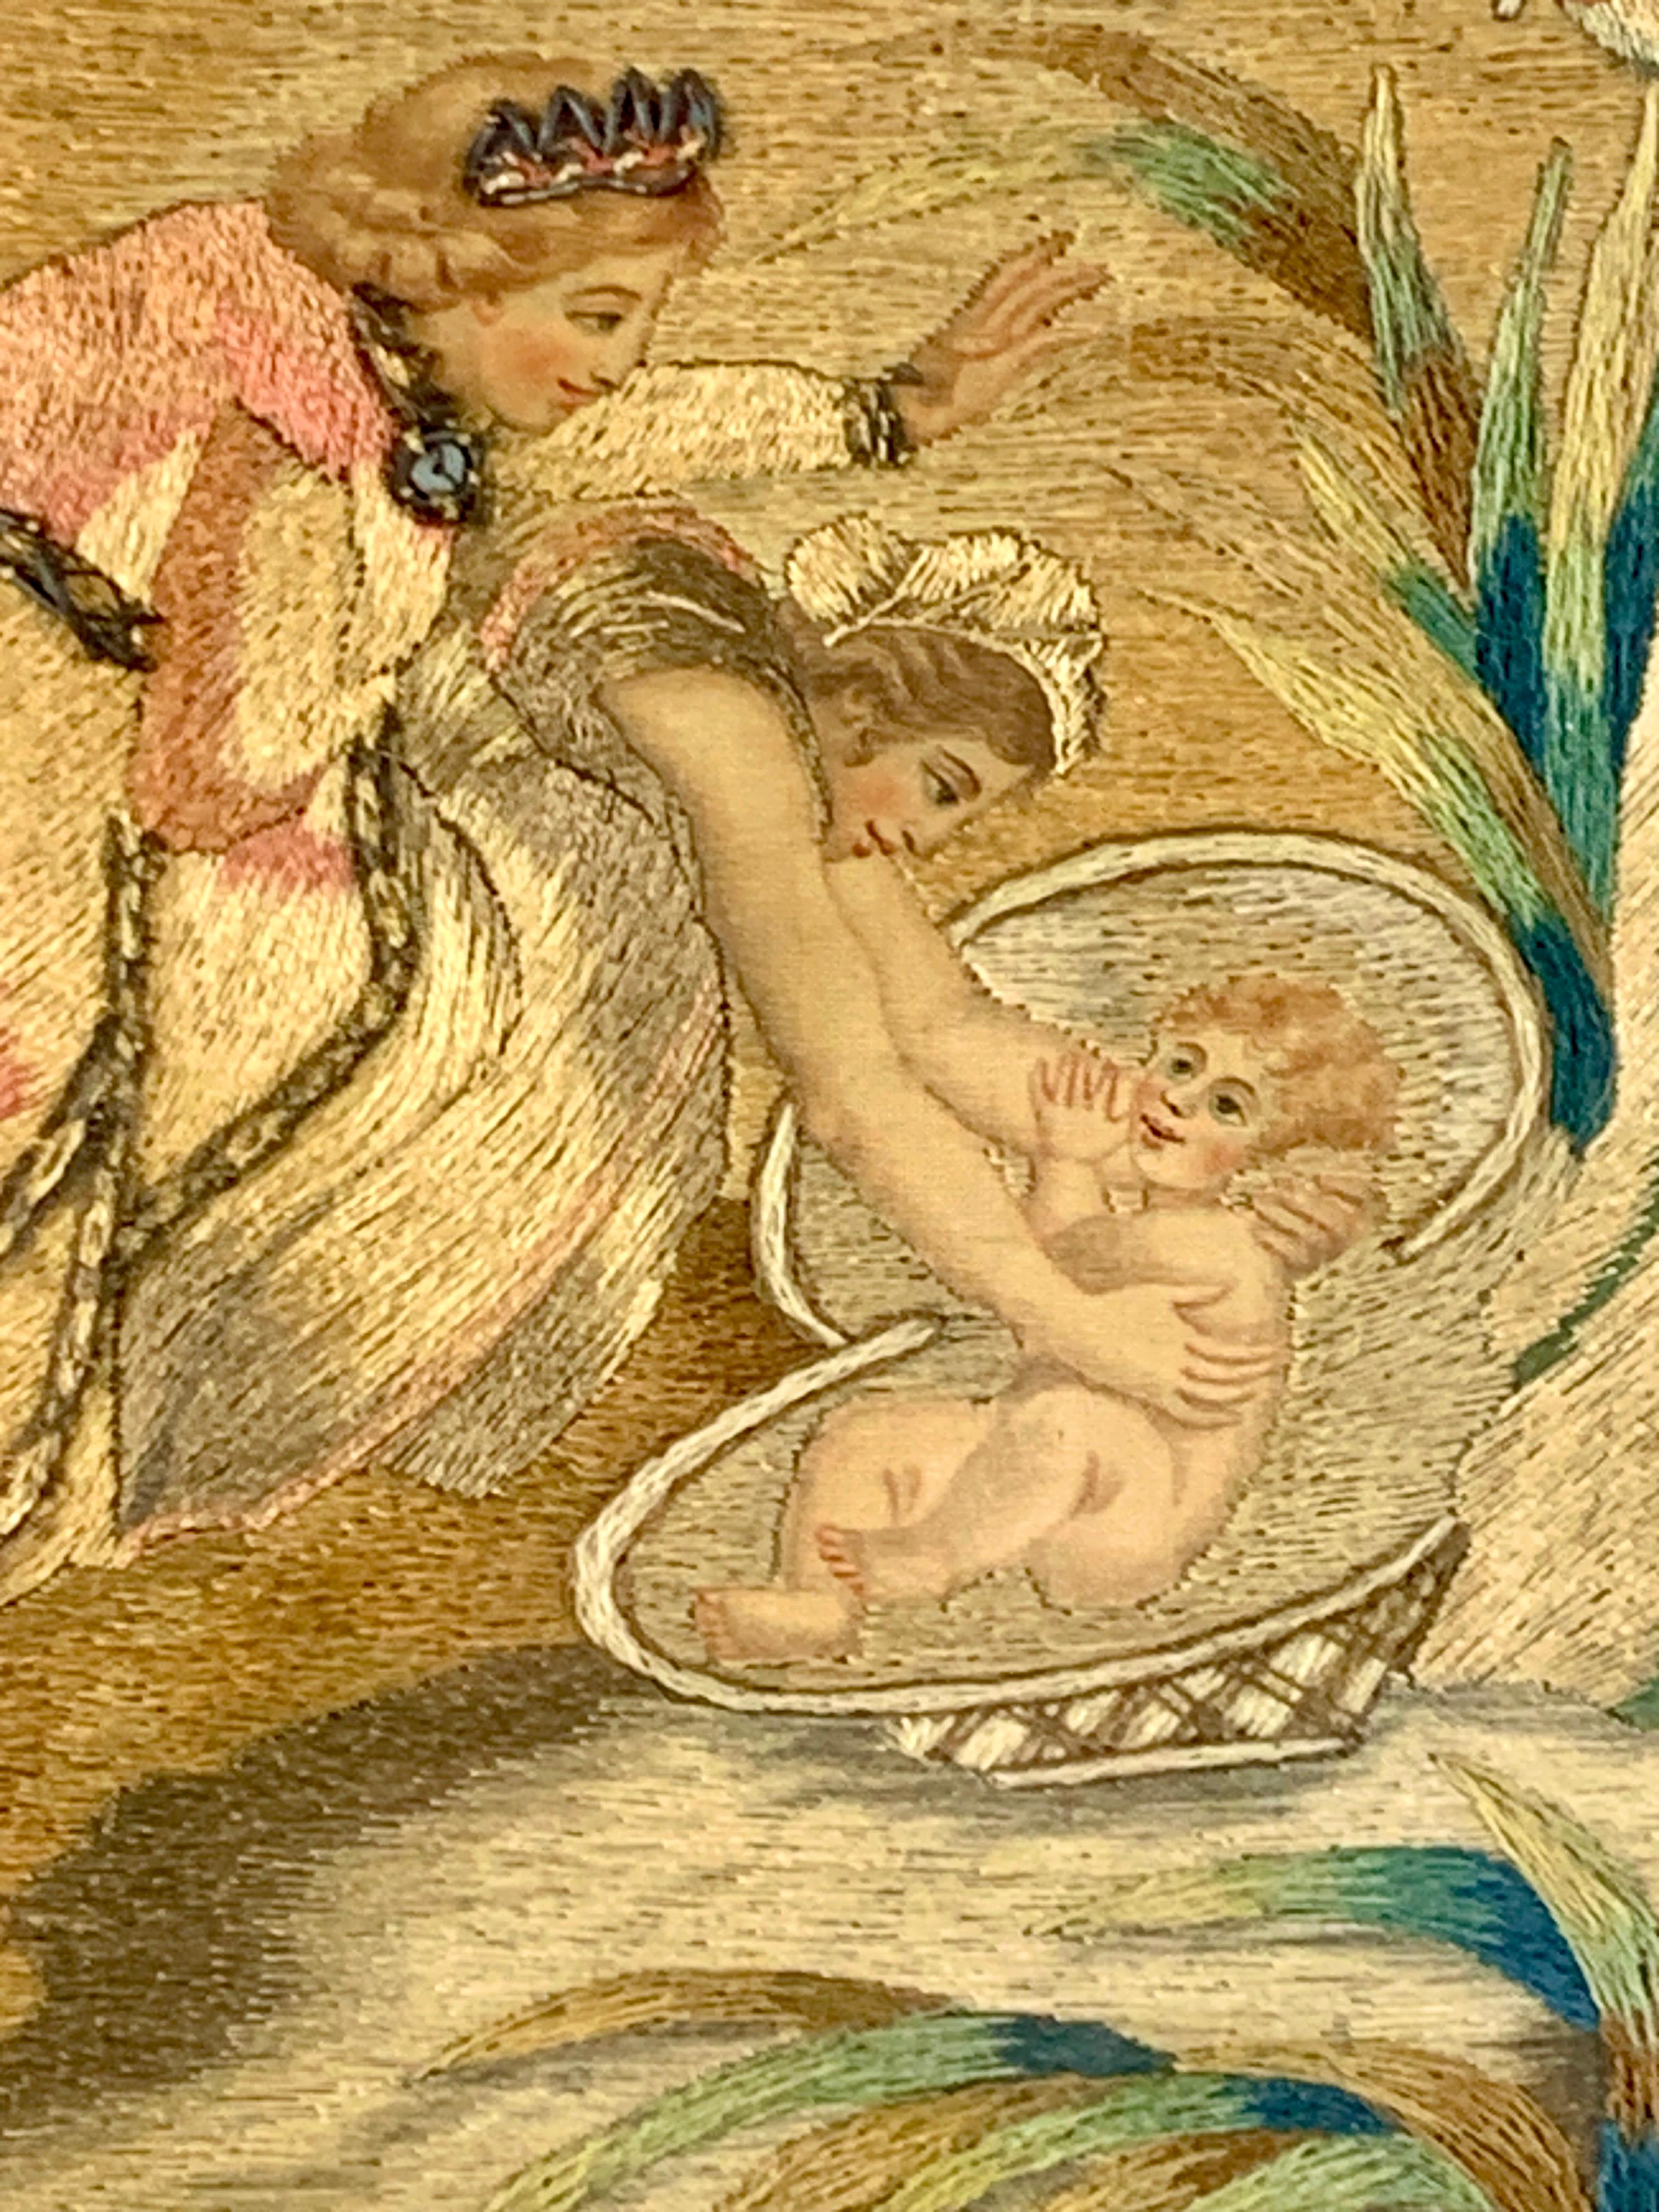 The Bible story of baby Moses drawn from the River Nile made with silkwork and chenille. 
Moses is gently taken from a basket made of reeds while his sister Miriam watches over him.
The women's dresses are Victorian in style. The colors are